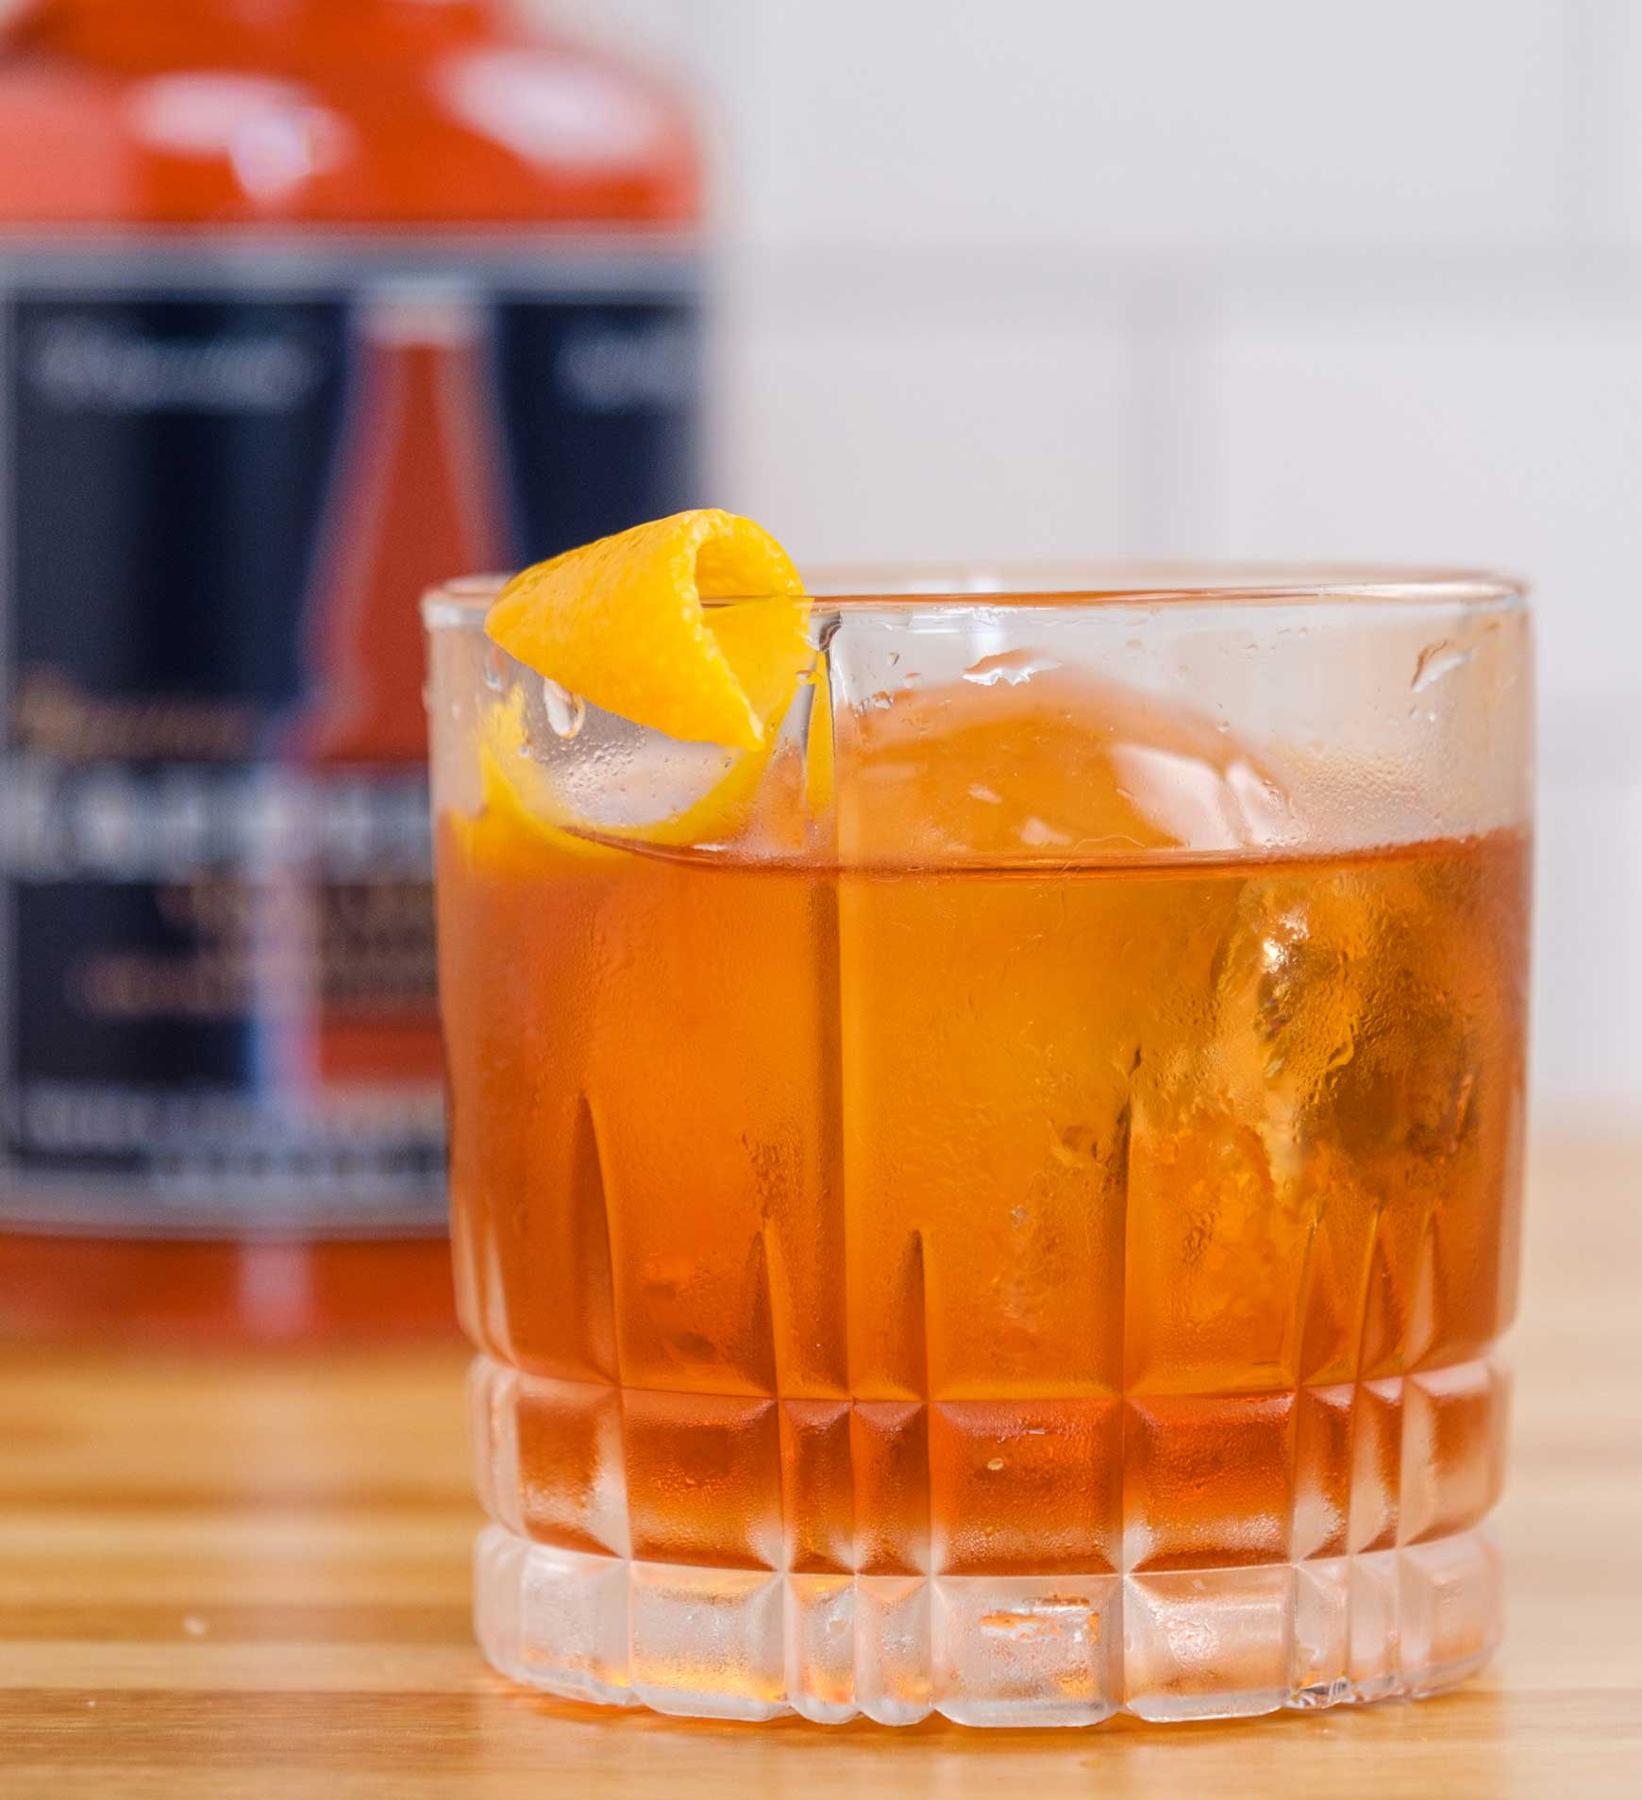 An example of the Boulevardier, the mixed drink (drink) featuring bourbon whiskey, Aperitivo Cappelletti, Dolin Rouge Vermouth de Chambéry, and orange twist; photo by Miranda Hodge